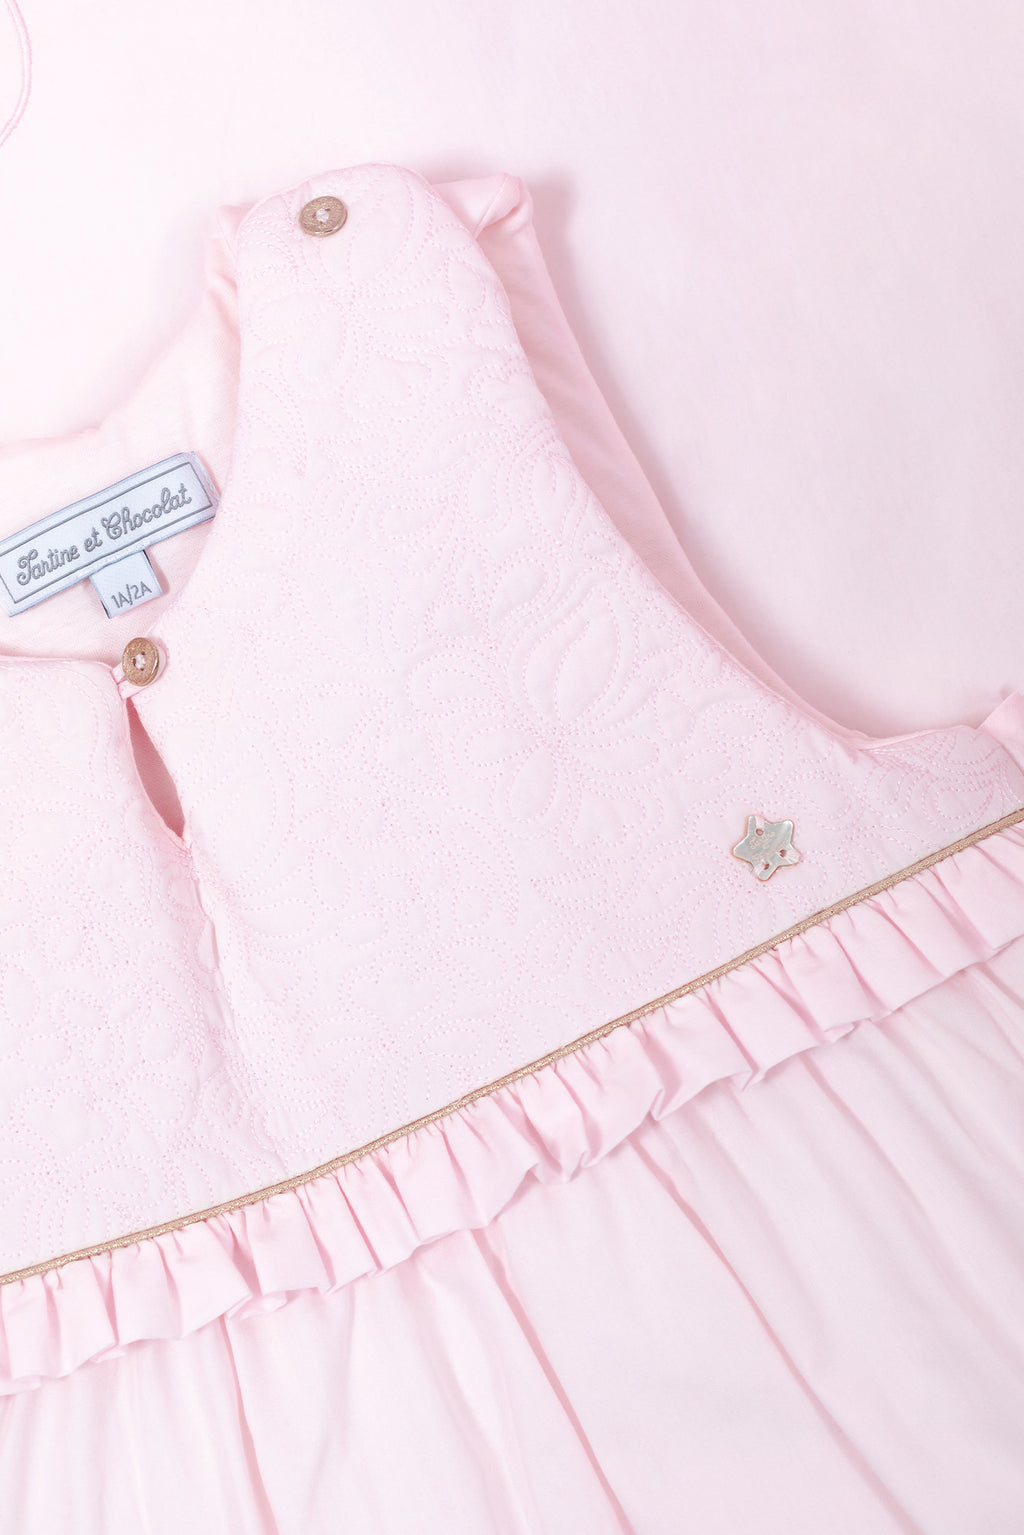 Sleeping bag - Delicacy Pale pink T2